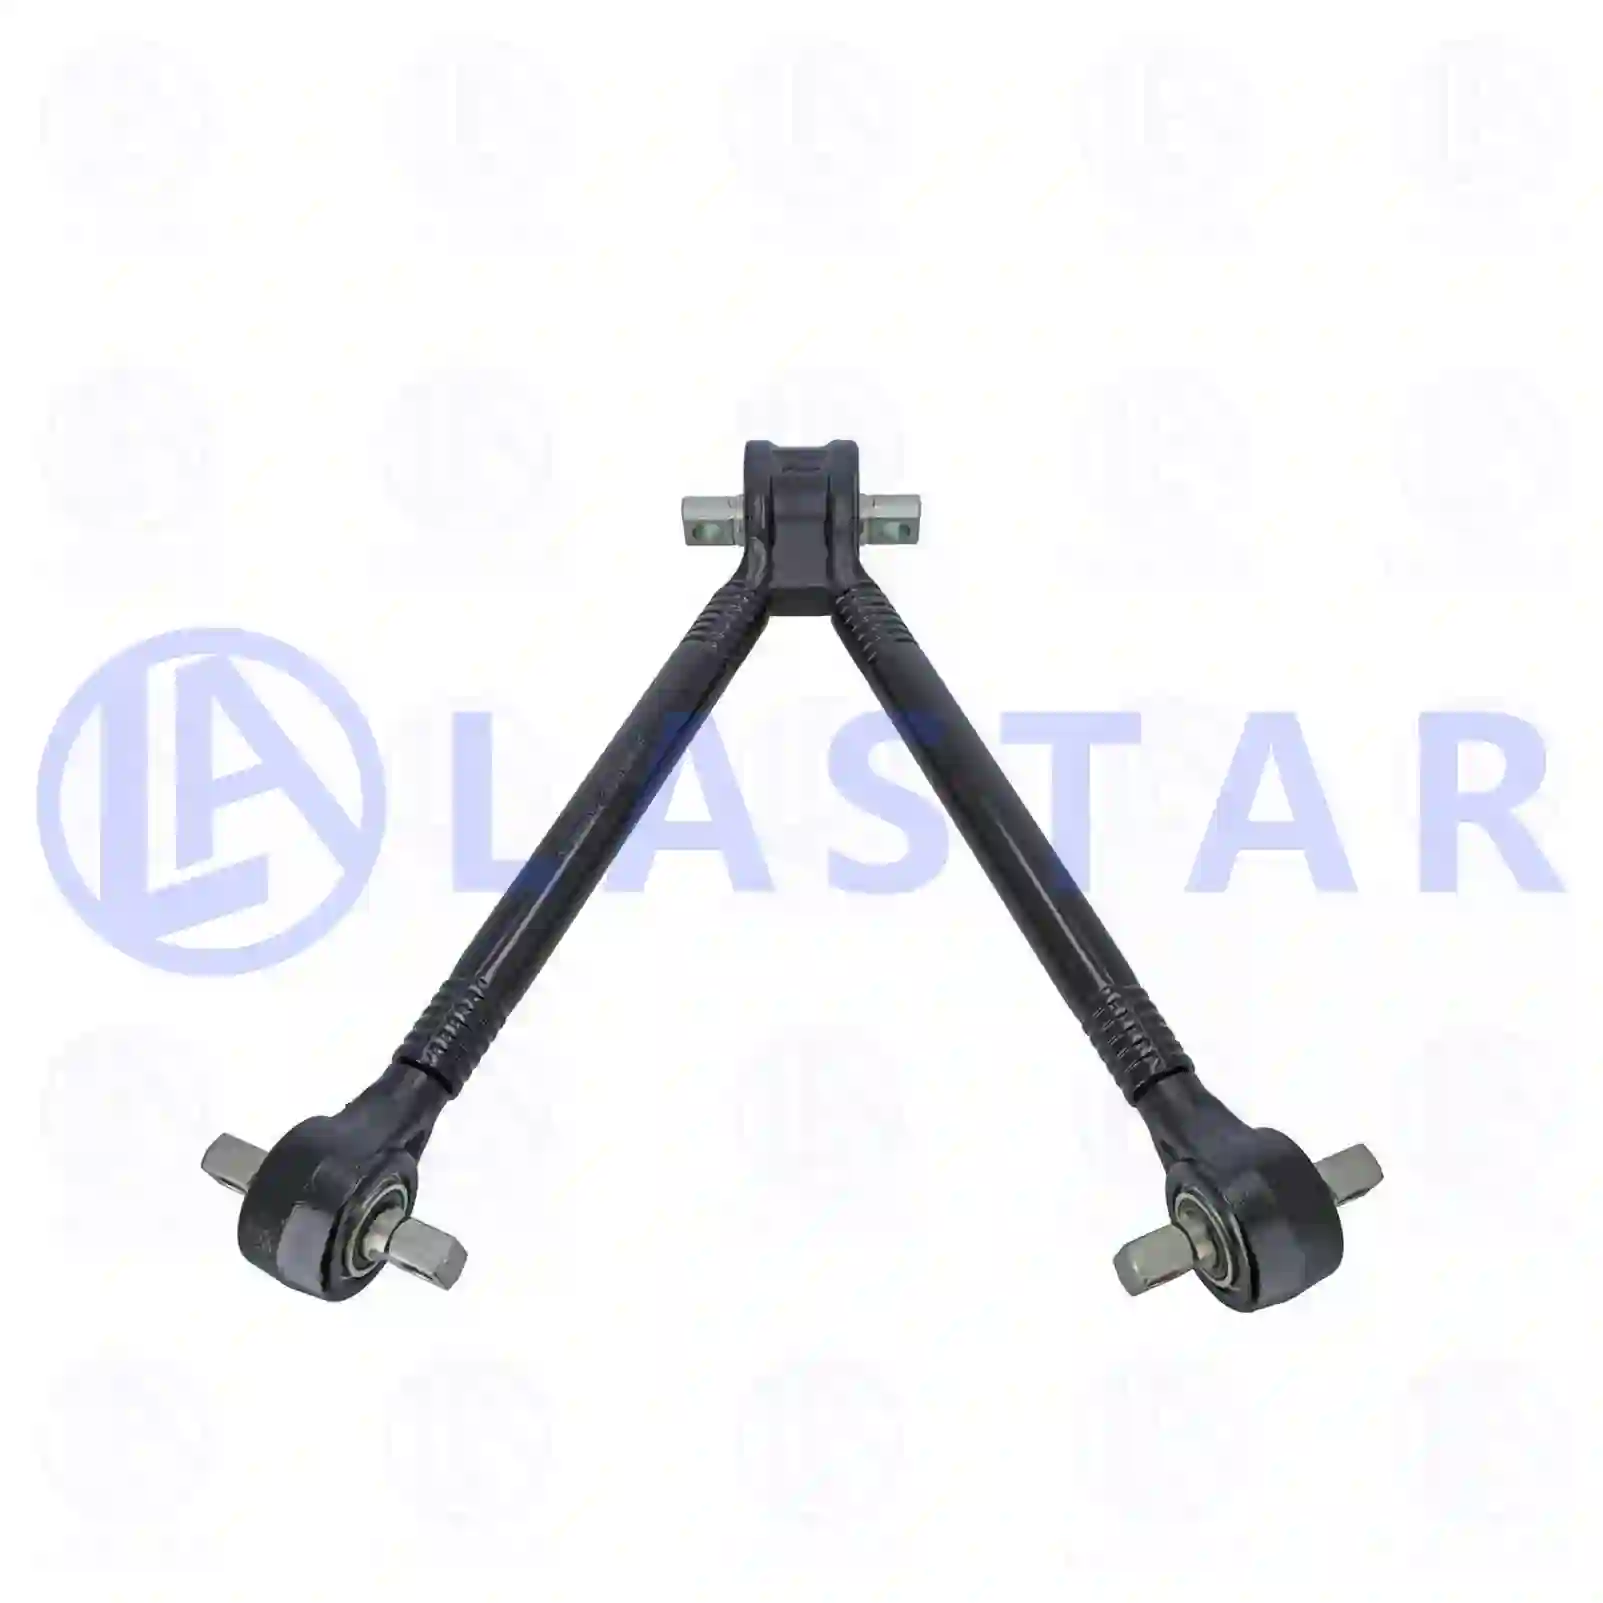 V-stay, 77727444, 41272706, 41272707, ||  77727444 Lastar Spare Part | Truck Spare Parts, Auotomotive Spare Parts V-stay, 77727444, 41272706, 41272707, ||  77727444 Lastar Spare Part | Truck Spare Parts, Auotomotive Spare Parts